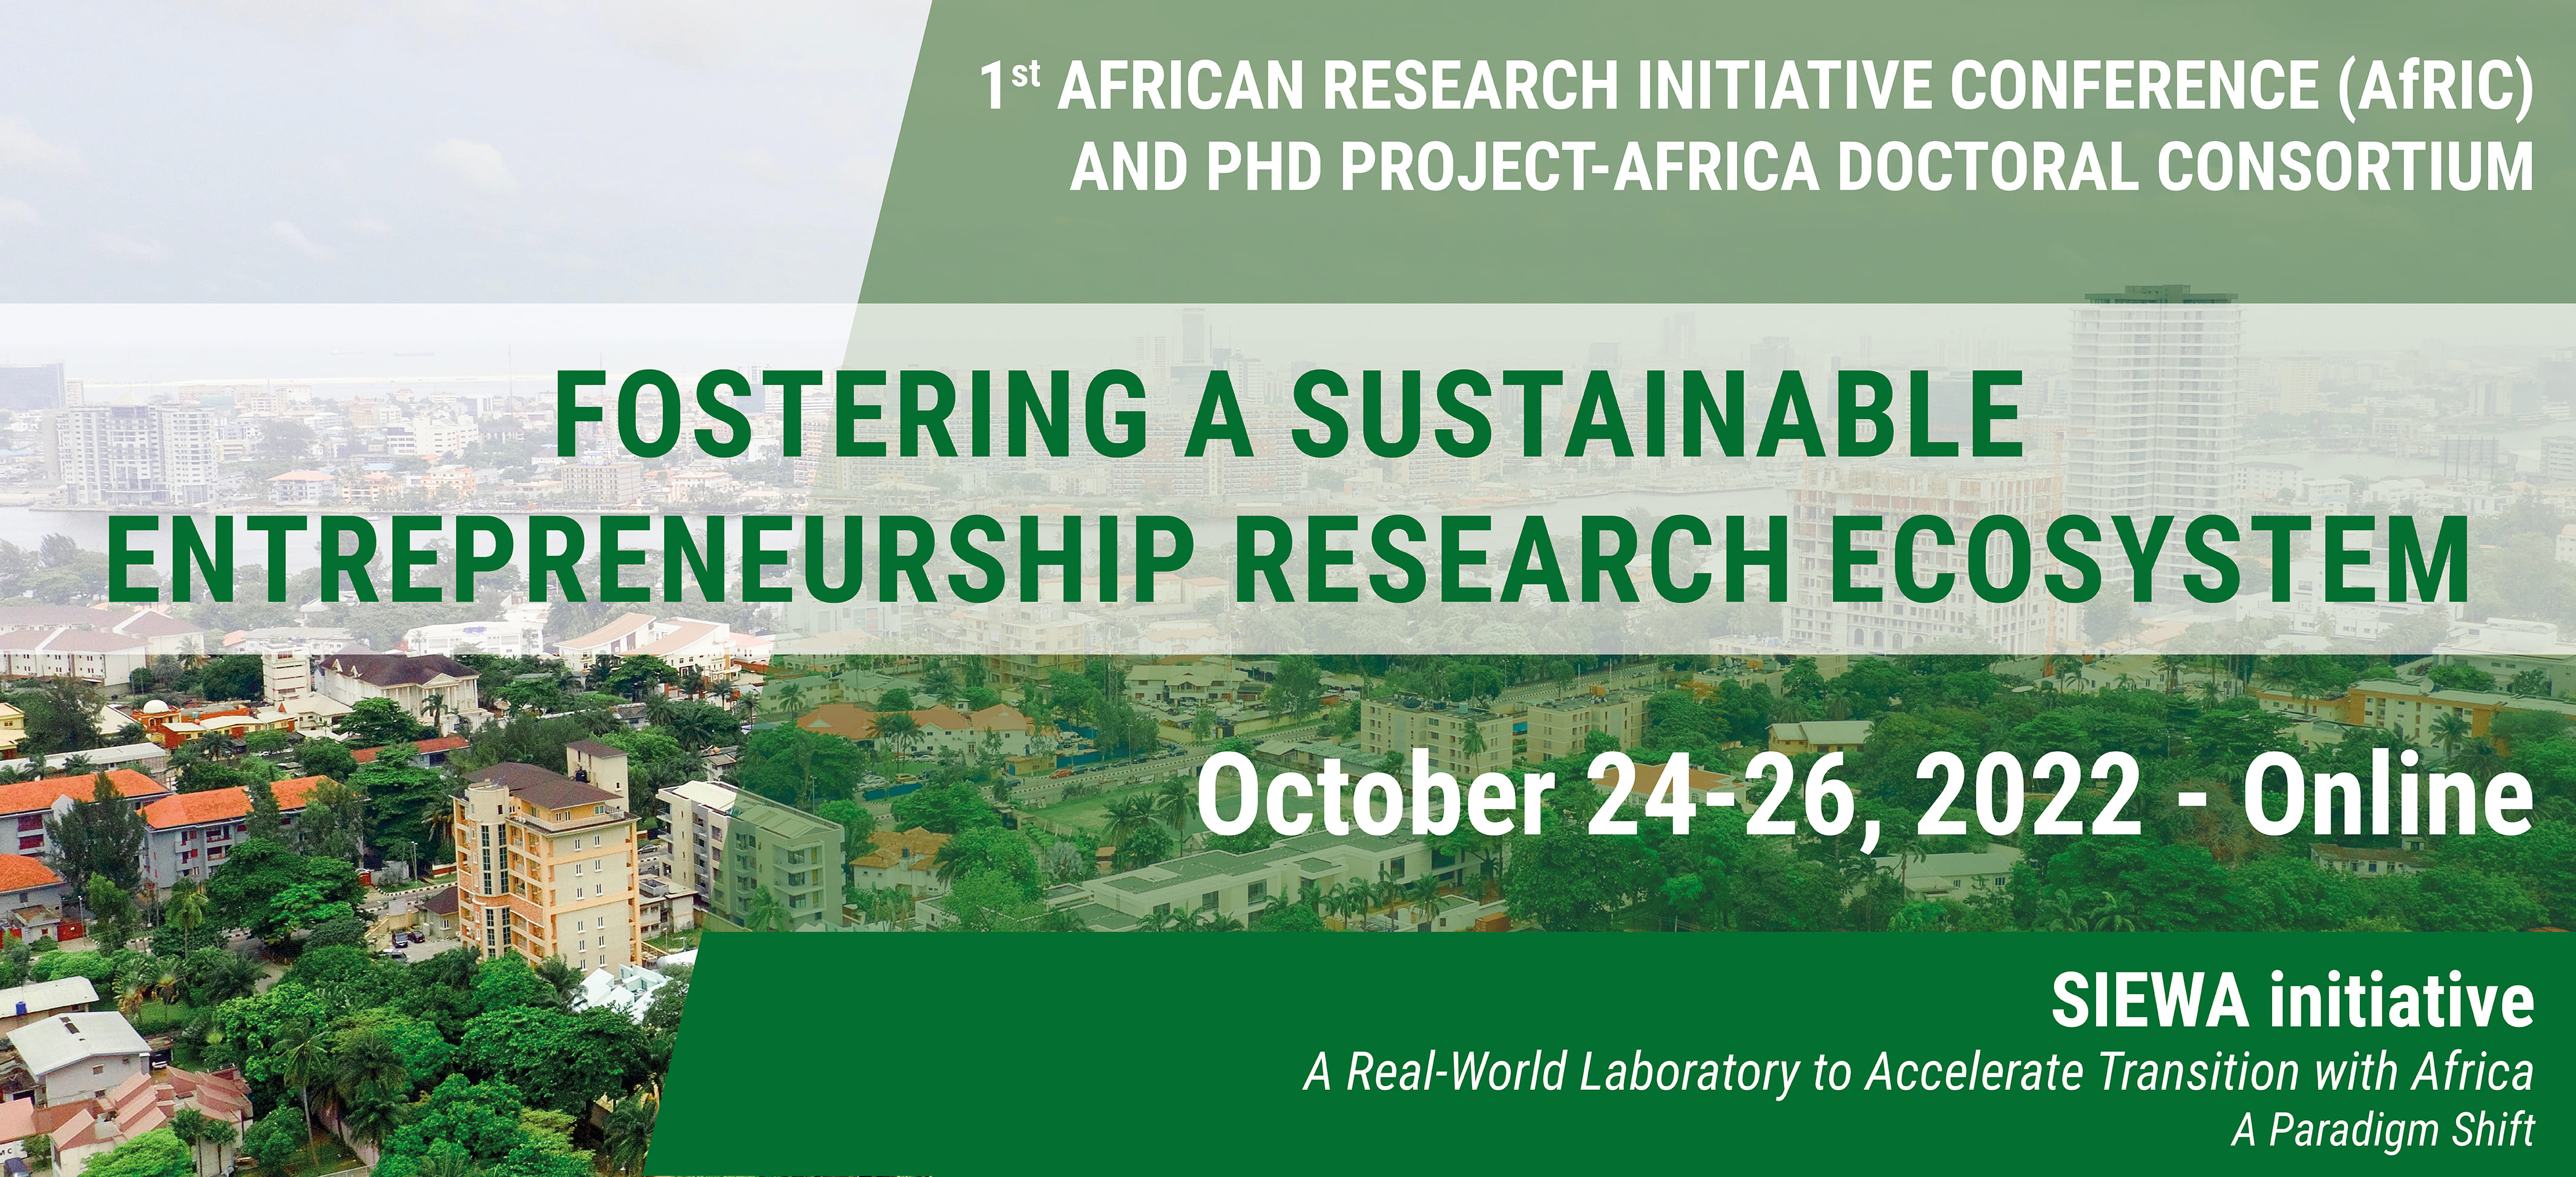 1ST AFRICAN RESEARCH INITIATIVE CONFERENCE (AFRIC)